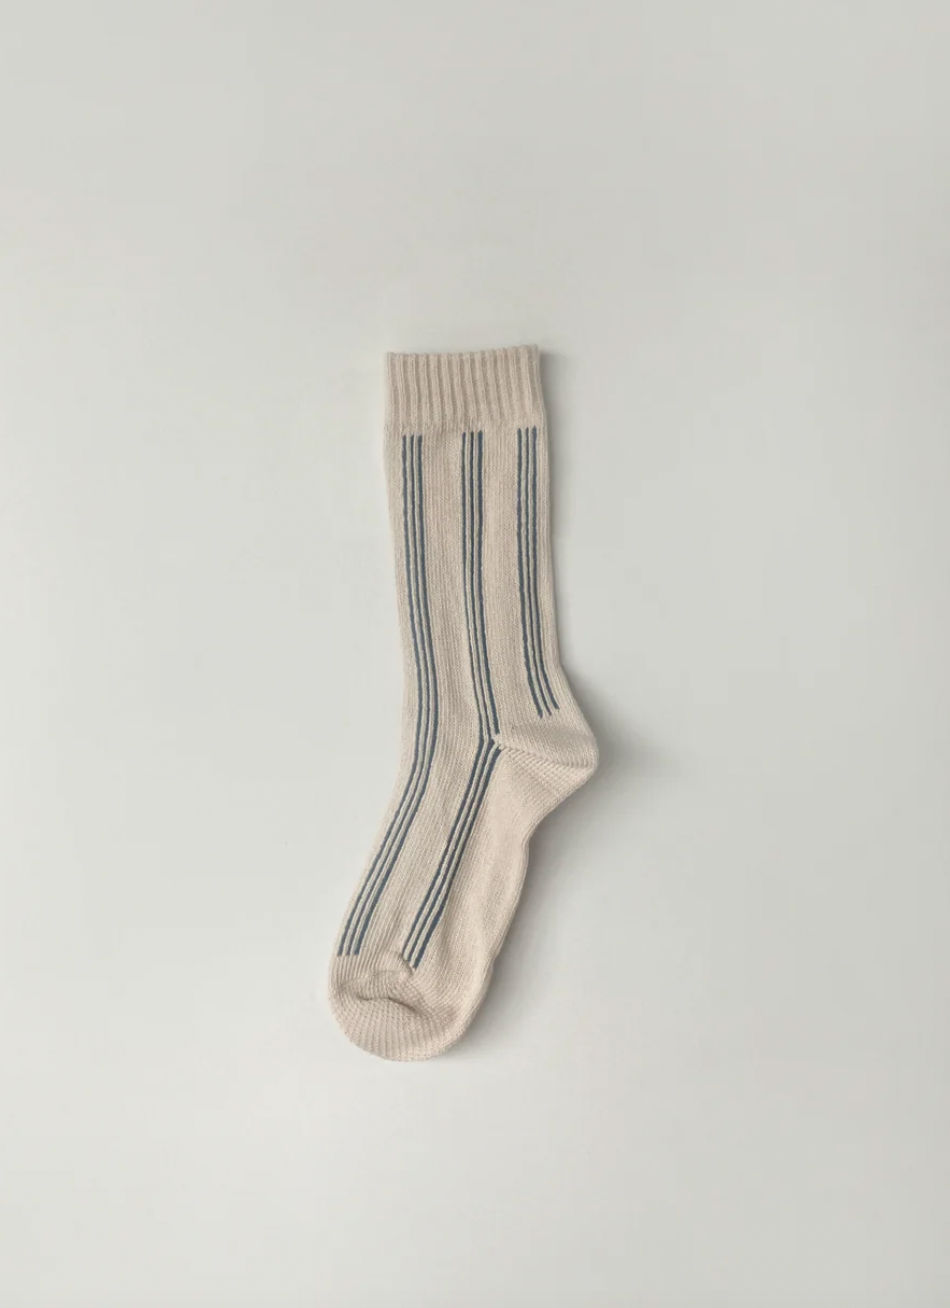 Product Image for The Woven Sock, River Stripe